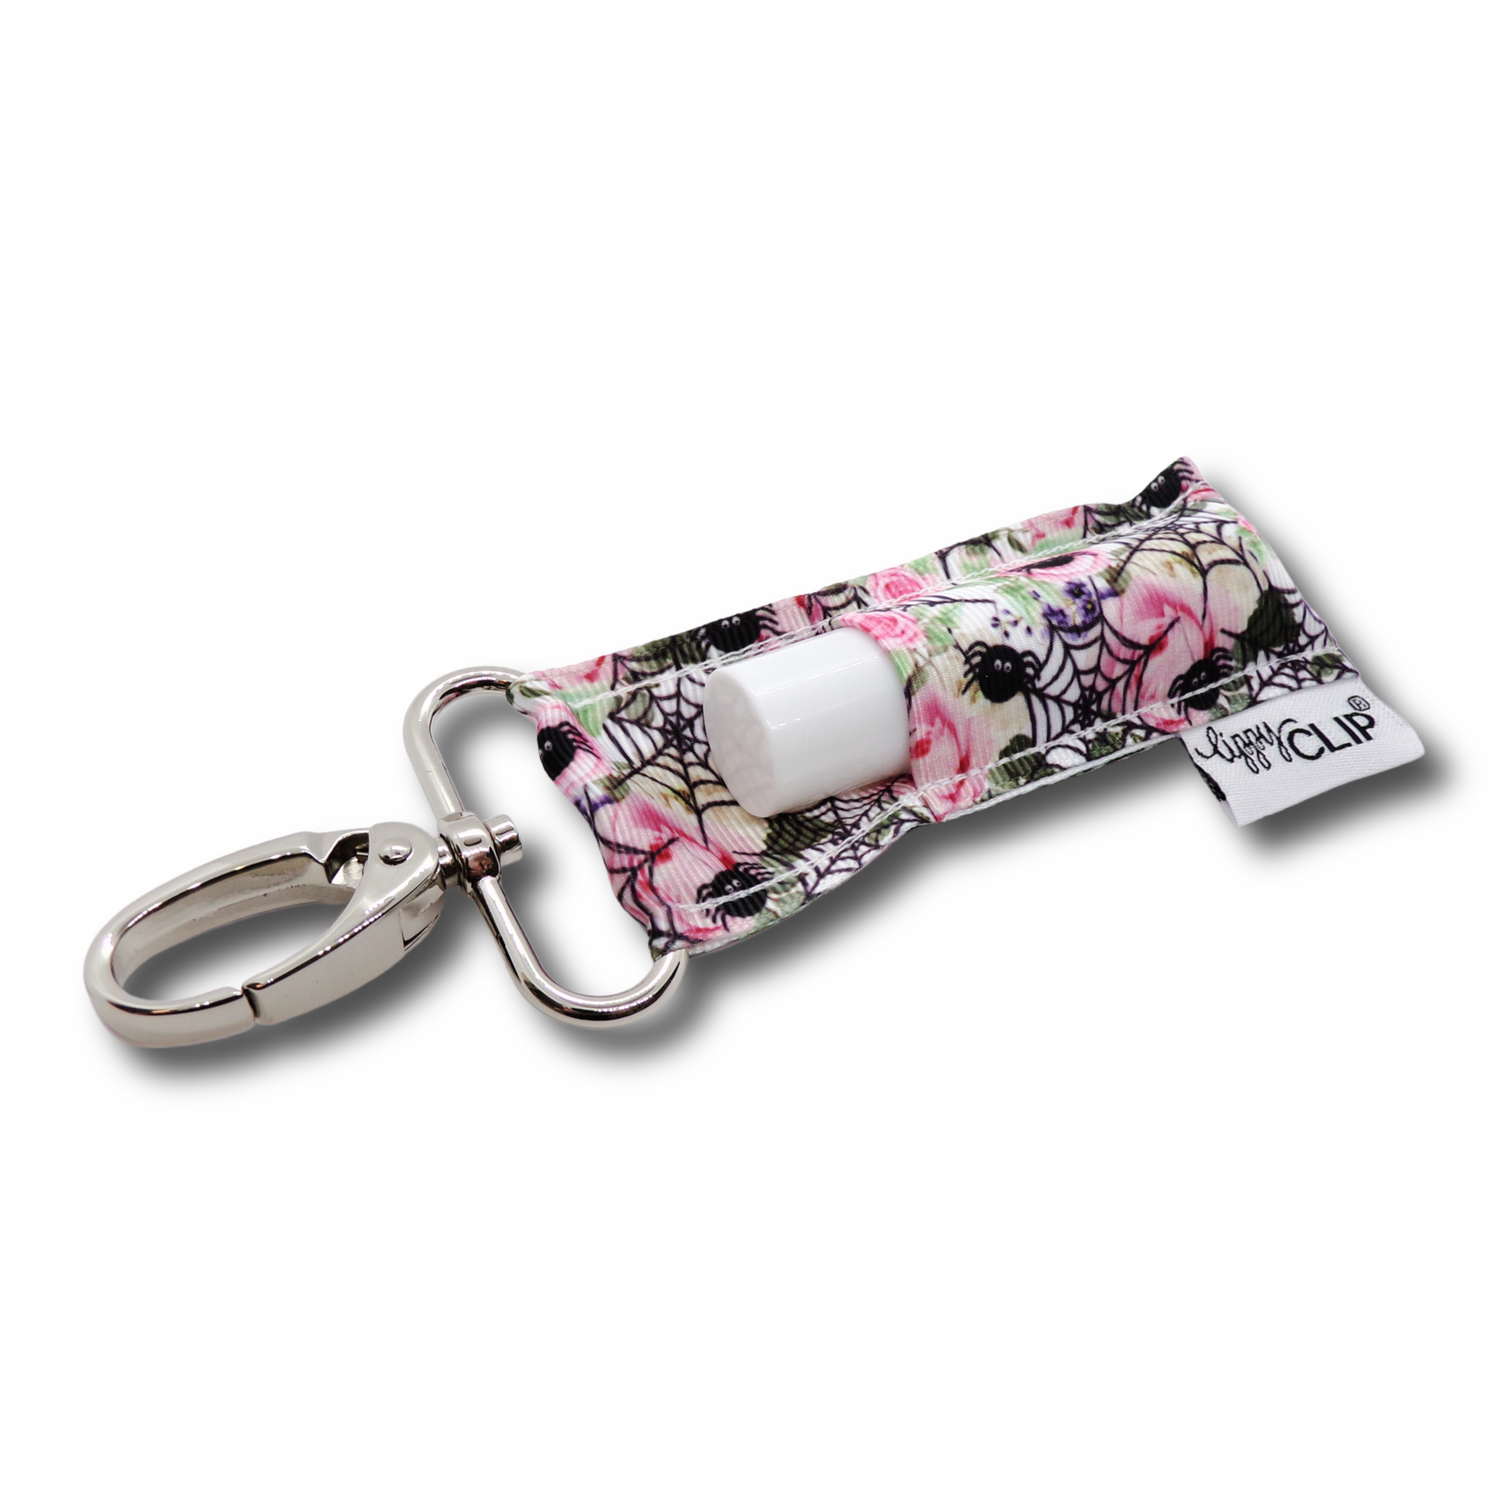 Roses and Spiders LippyClip® - Discount Already Applied